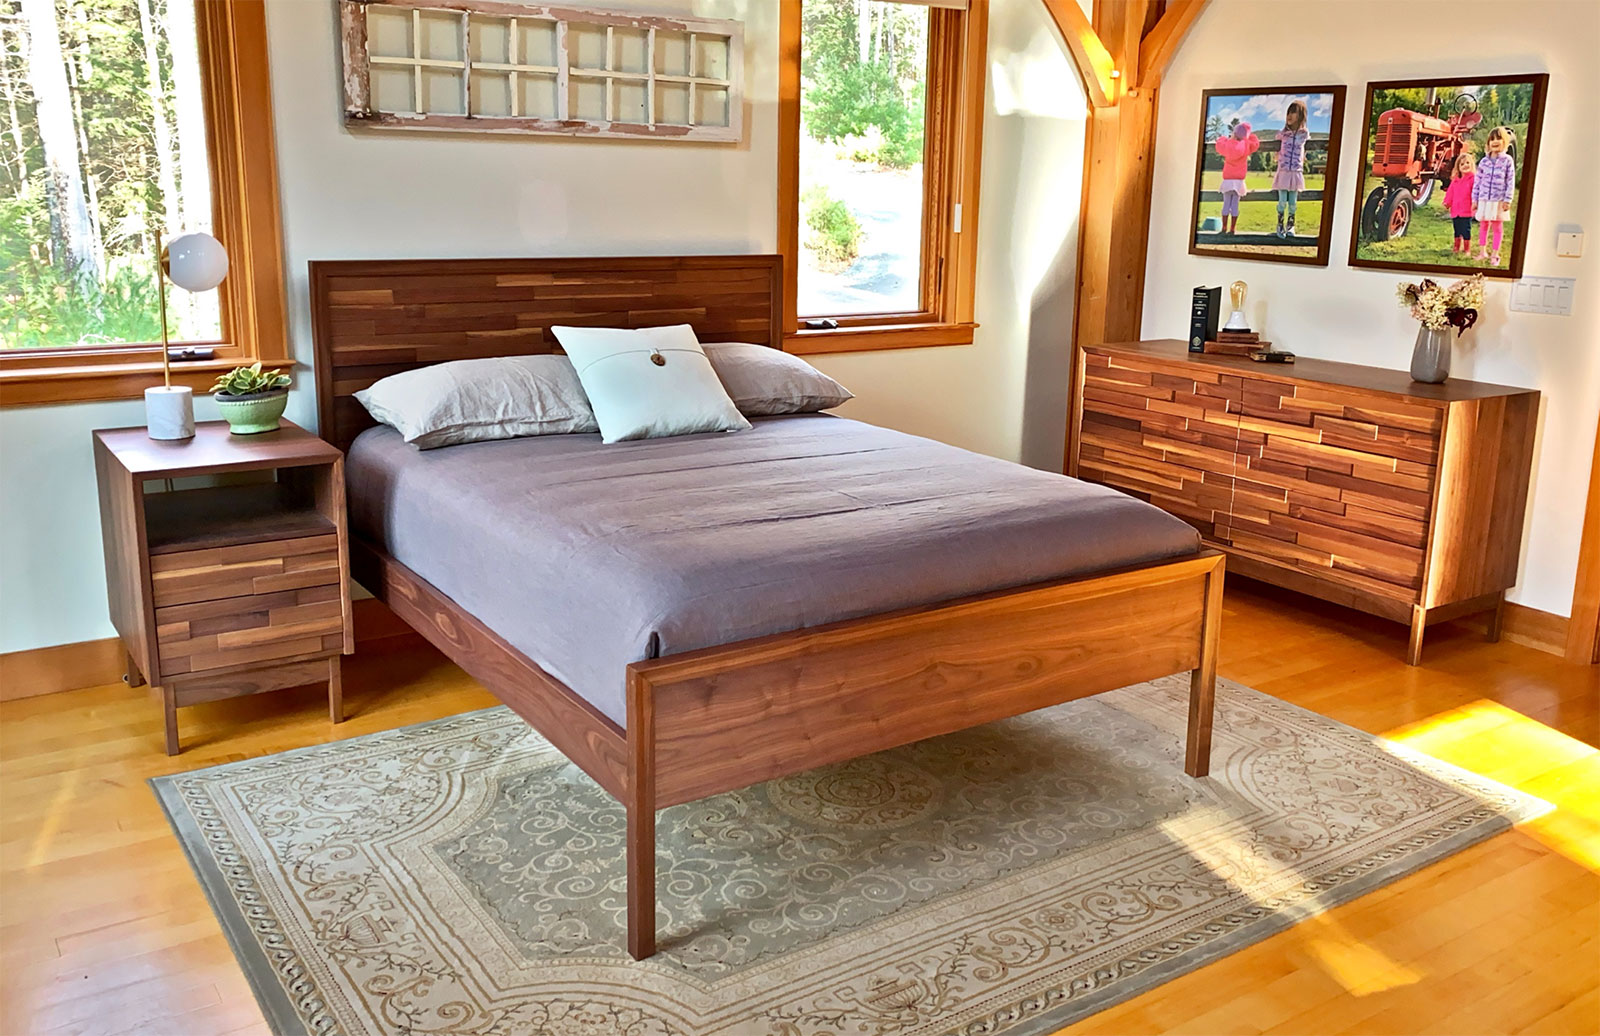 Bed and dresser in walnut